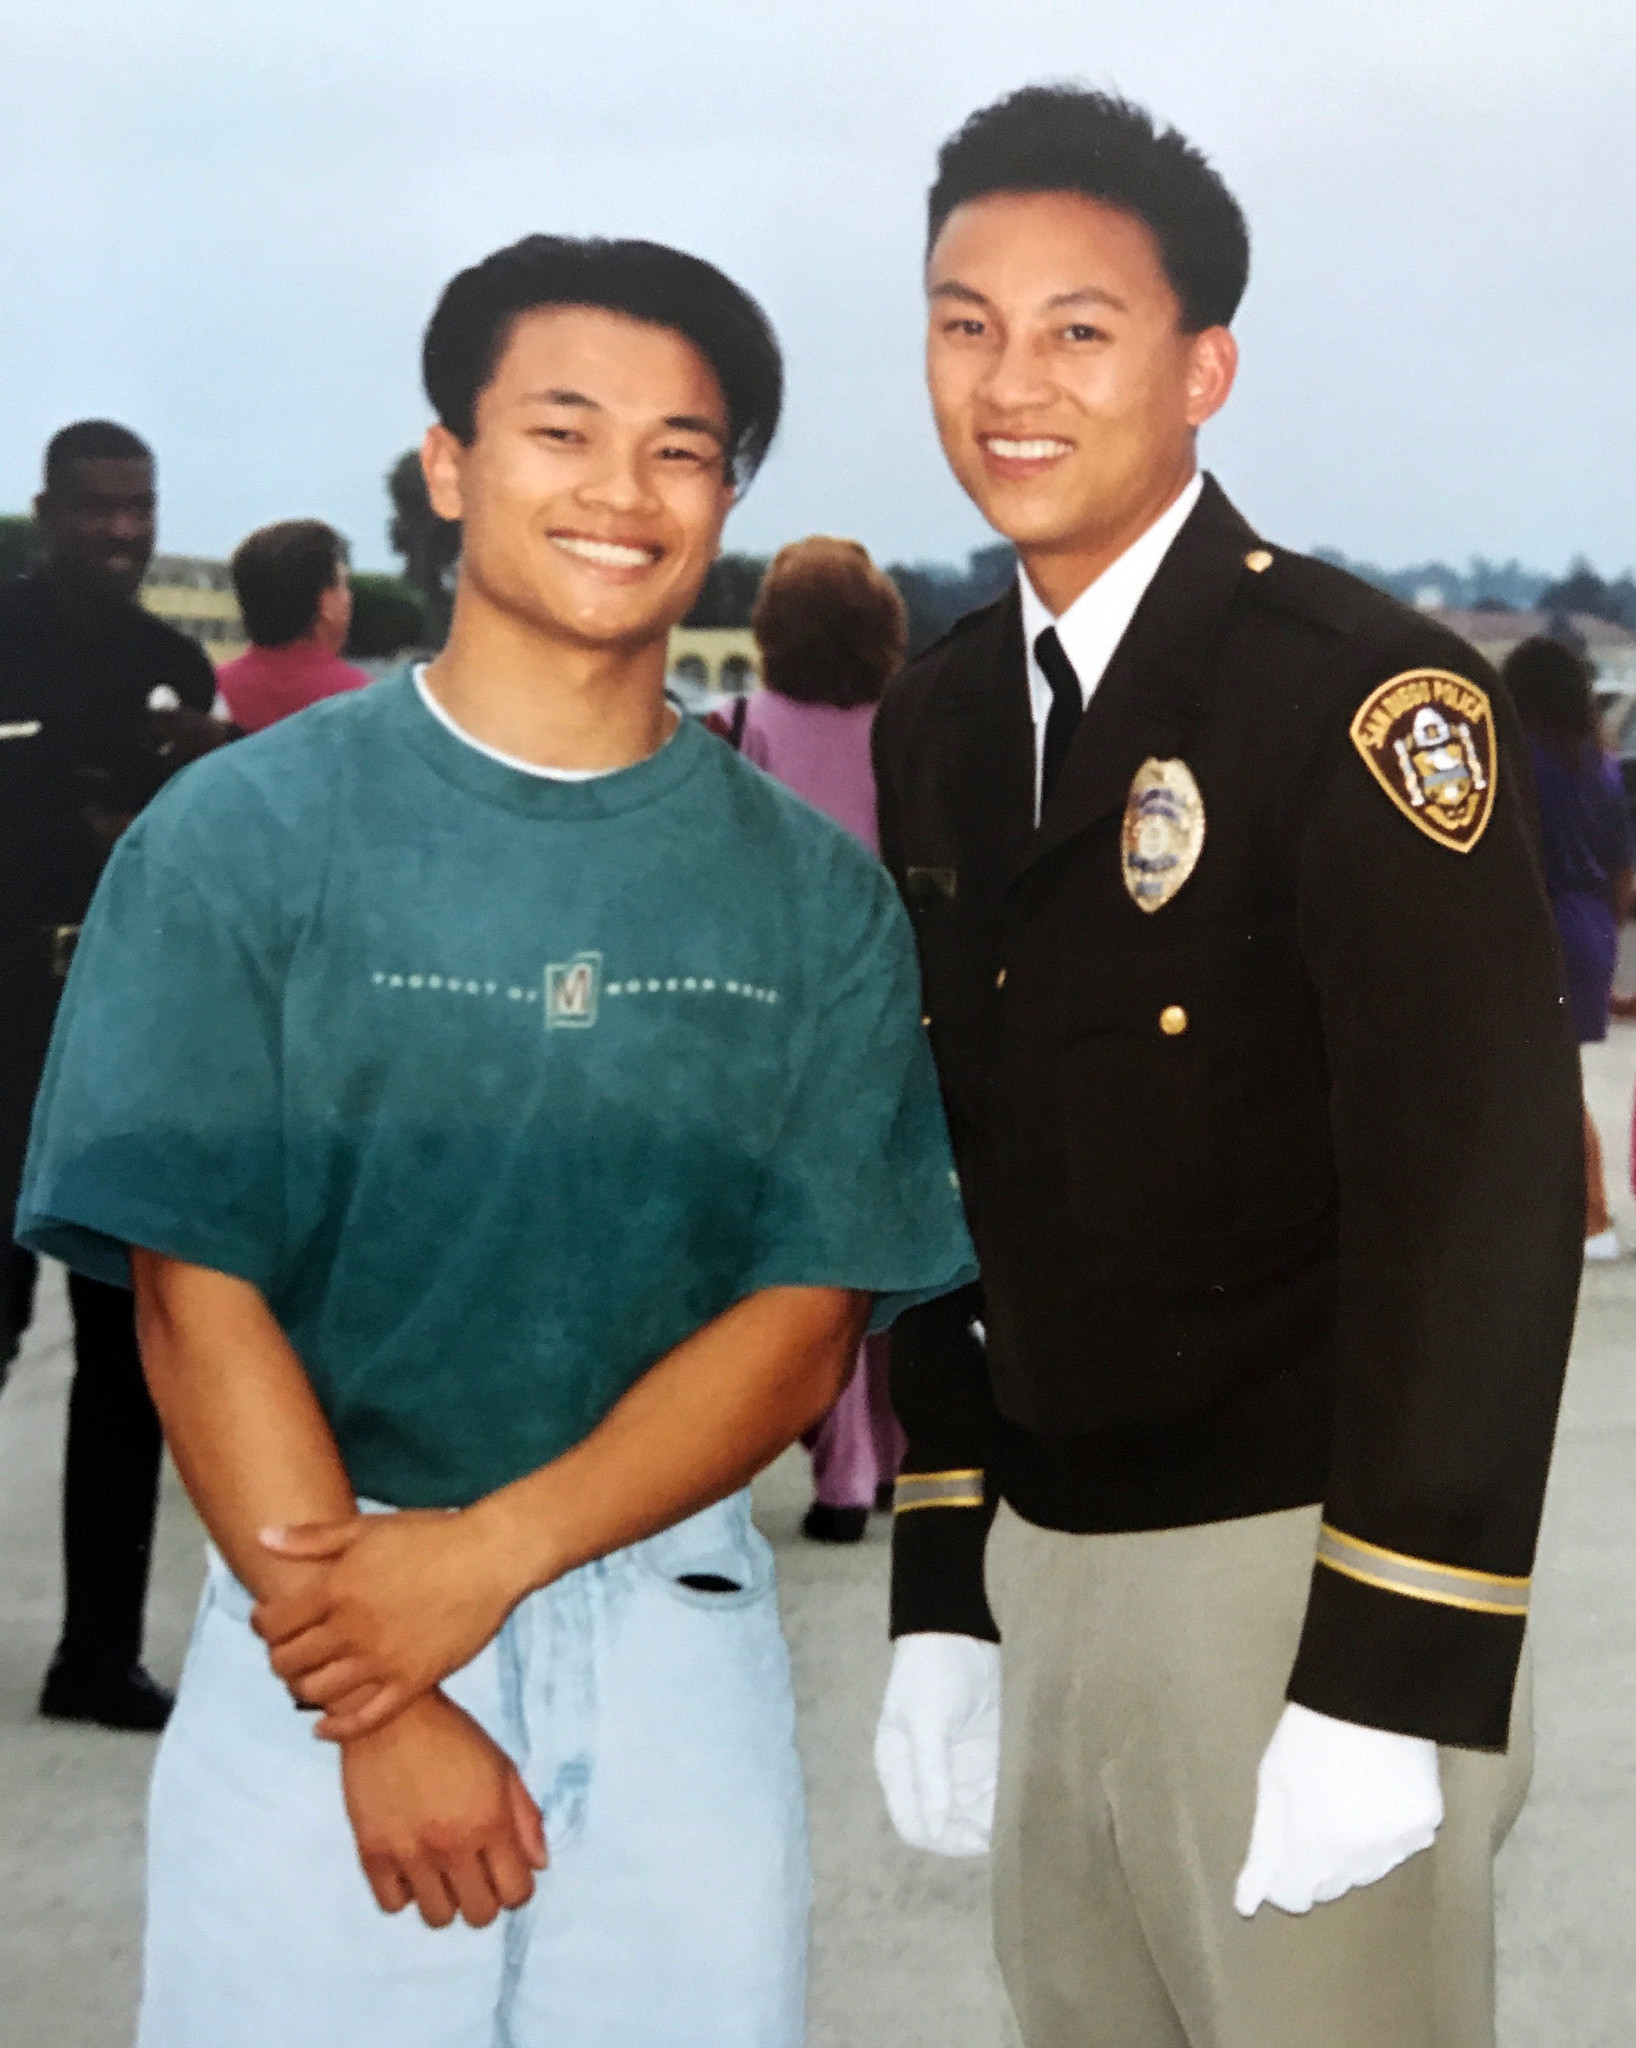 Timothy Vu, right, pictured with his brother, Tom, after graduating from the police academy in San Diego in 1993 at age 23.